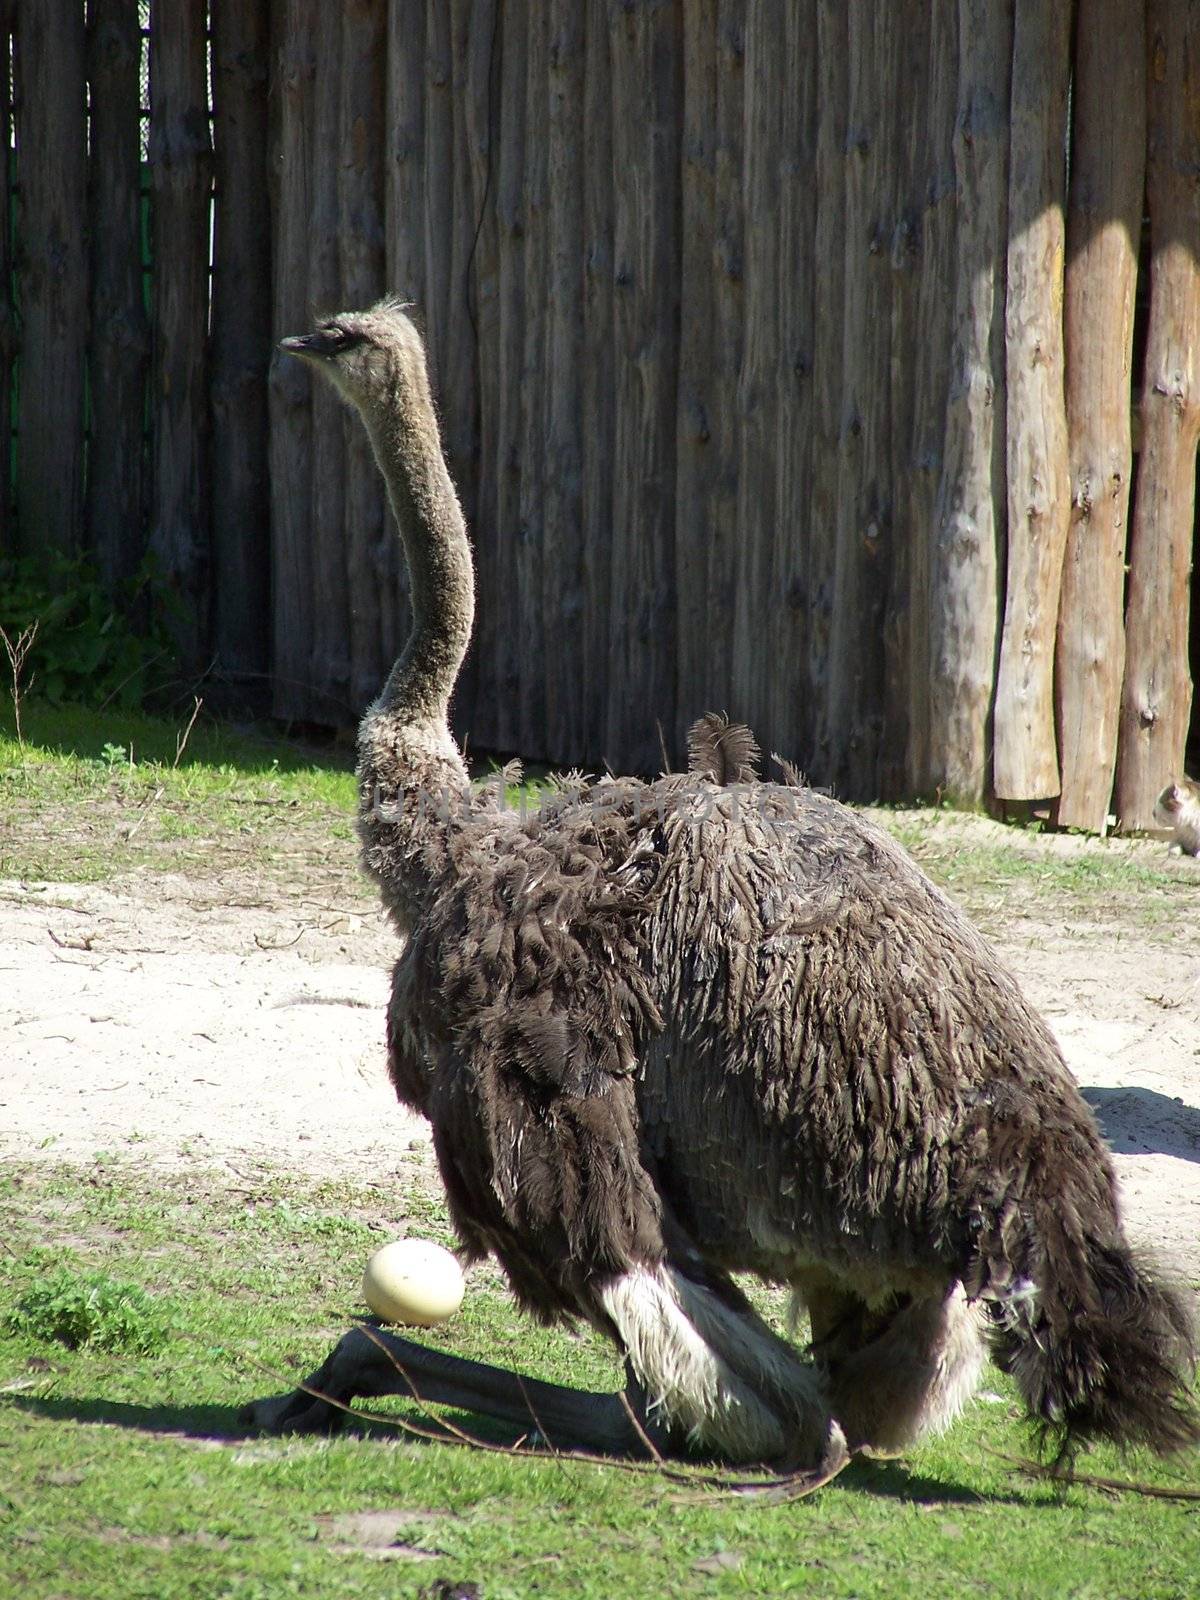 Adult ostrich sitting near egg at the zoo.